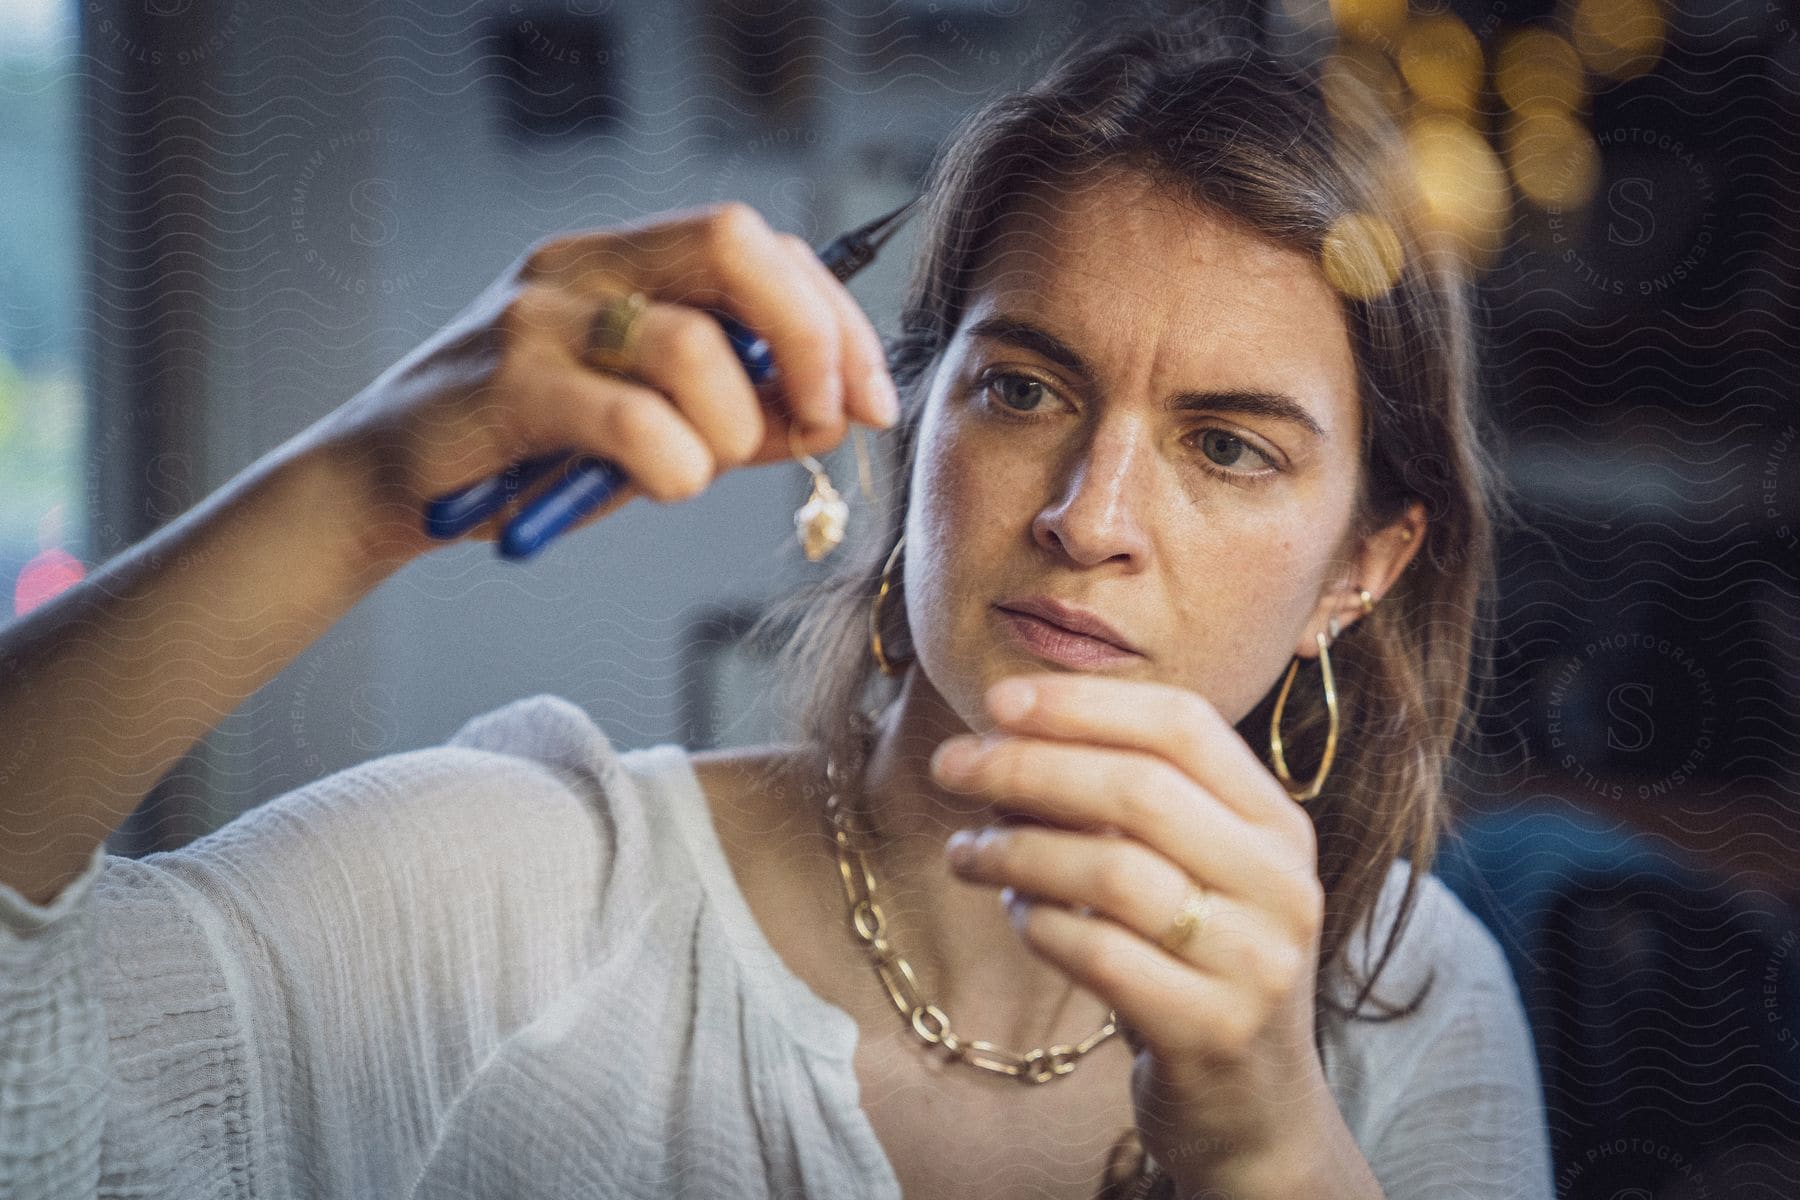 A woman in her 40s examines jewelry with pliers